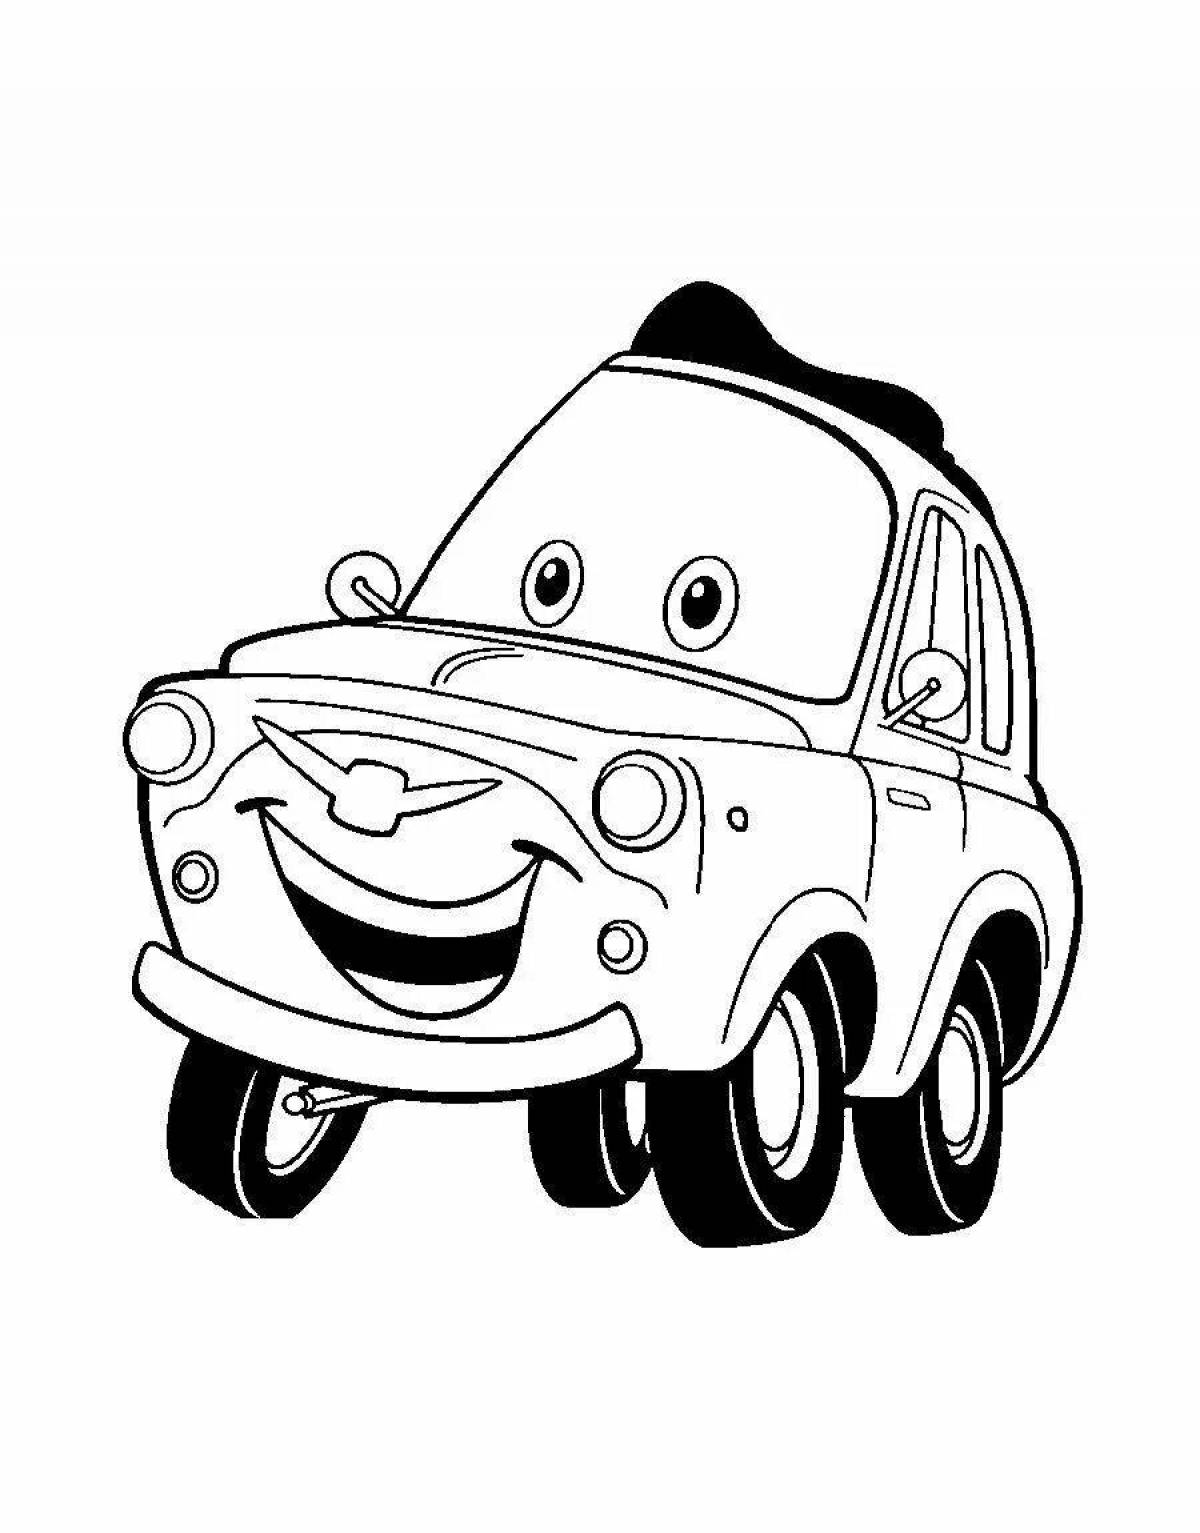 Cute sheriff's car coloring page